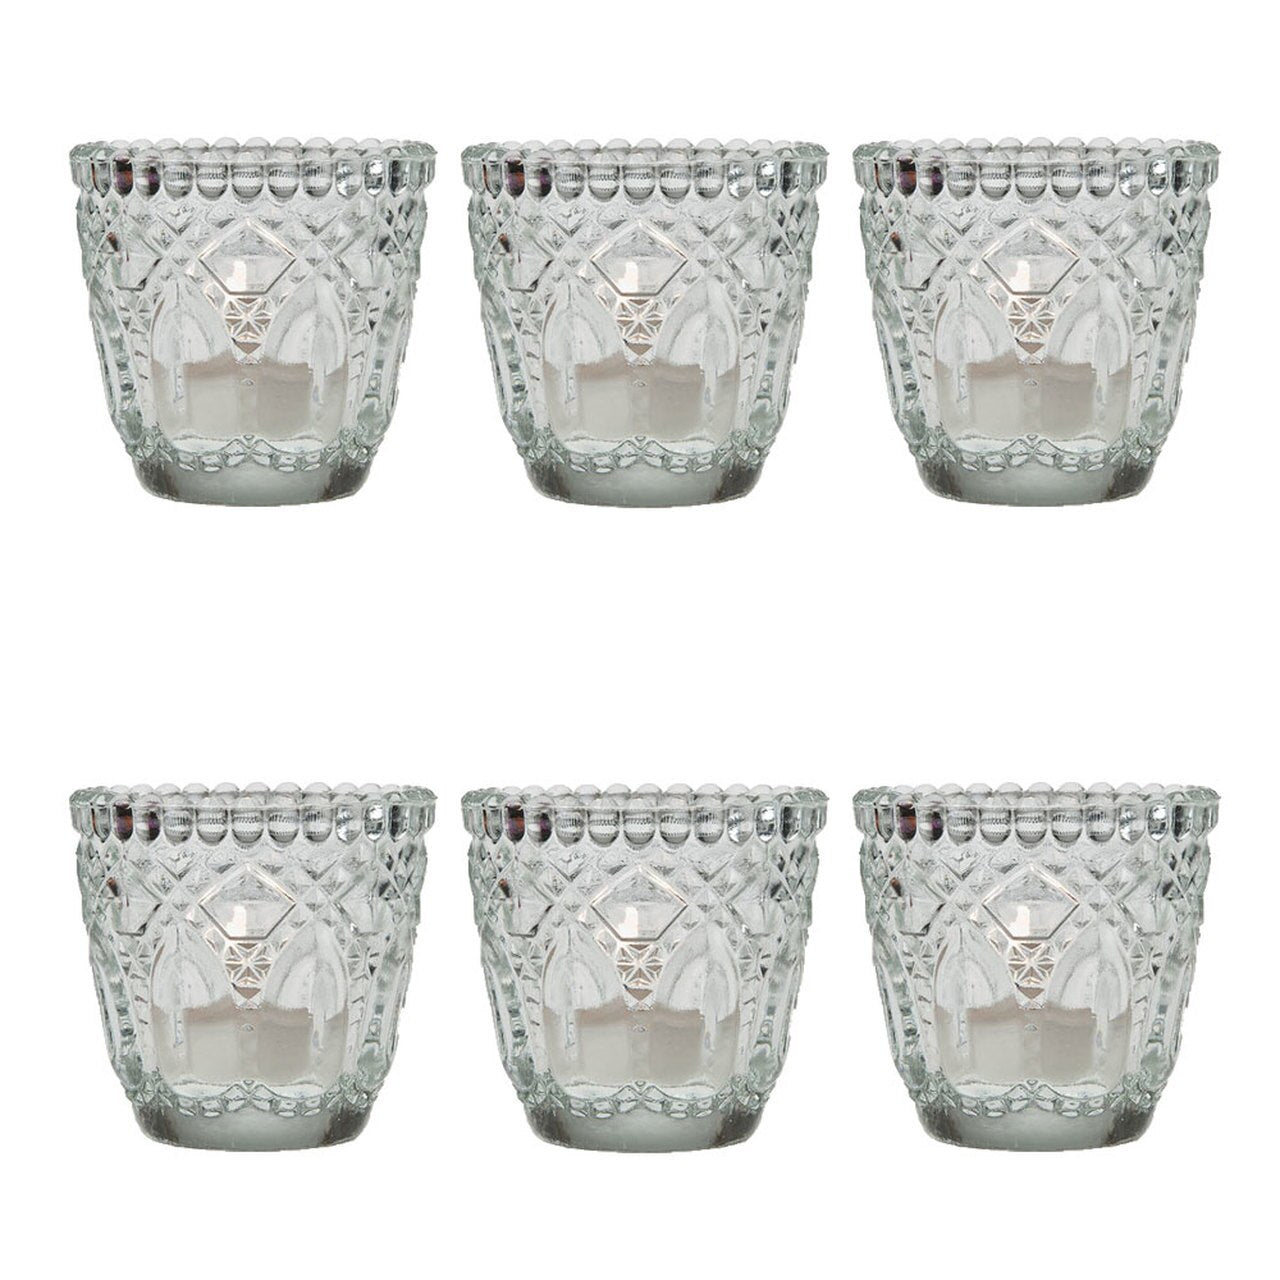 6 Pack | Faceted Vintage Glass Candle Holders (2.75-Inch, Lillian Design, Clear) - Use with Tea Lights - For Home Decor, Parties and Wedding Decorations - PaperLanternStore.com - Paper Lanterns, Decor, Party Lights & More